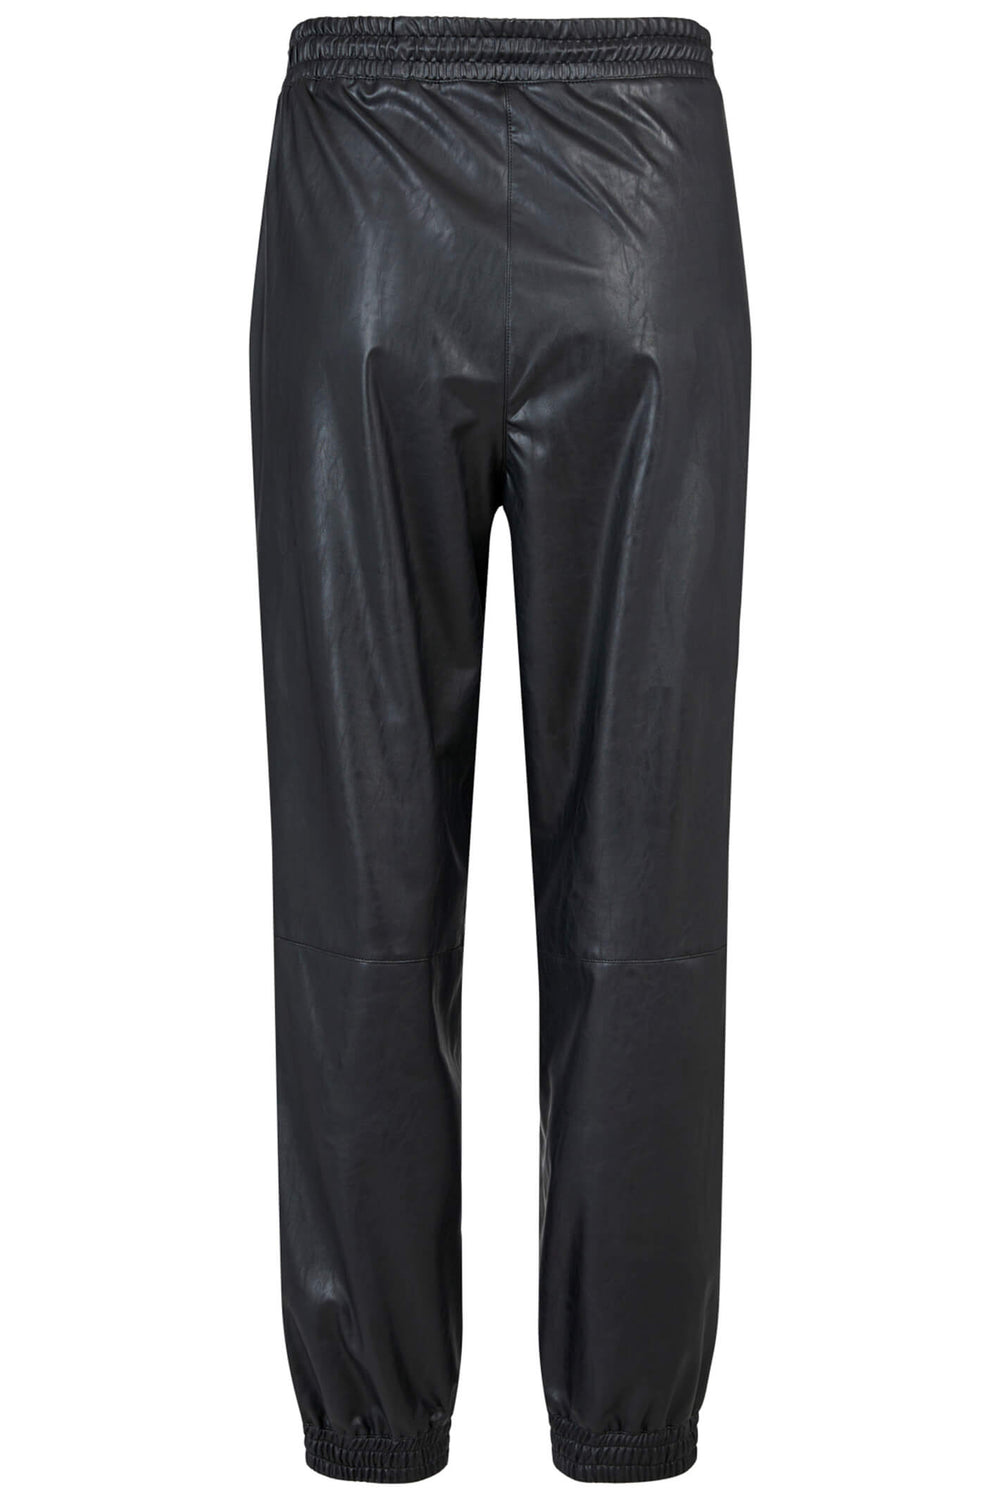 Que 31101 Black Faux Leather Pull-On Trousers - Experience Boutique